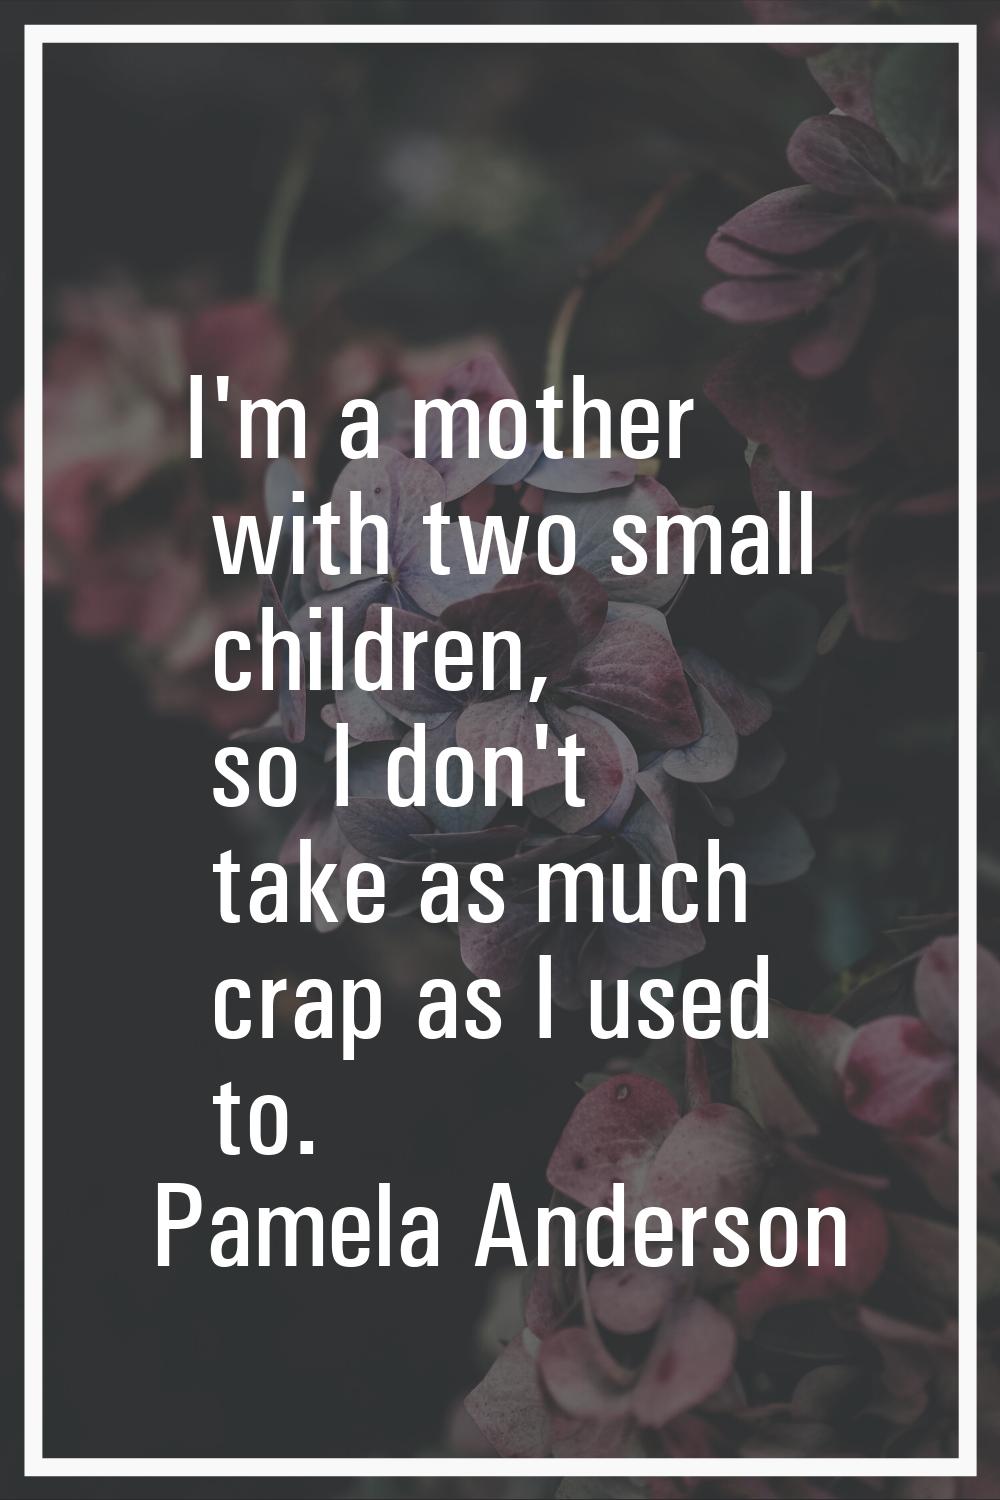 I'm a mother with two small children, so I don't take as much crap as I used to.